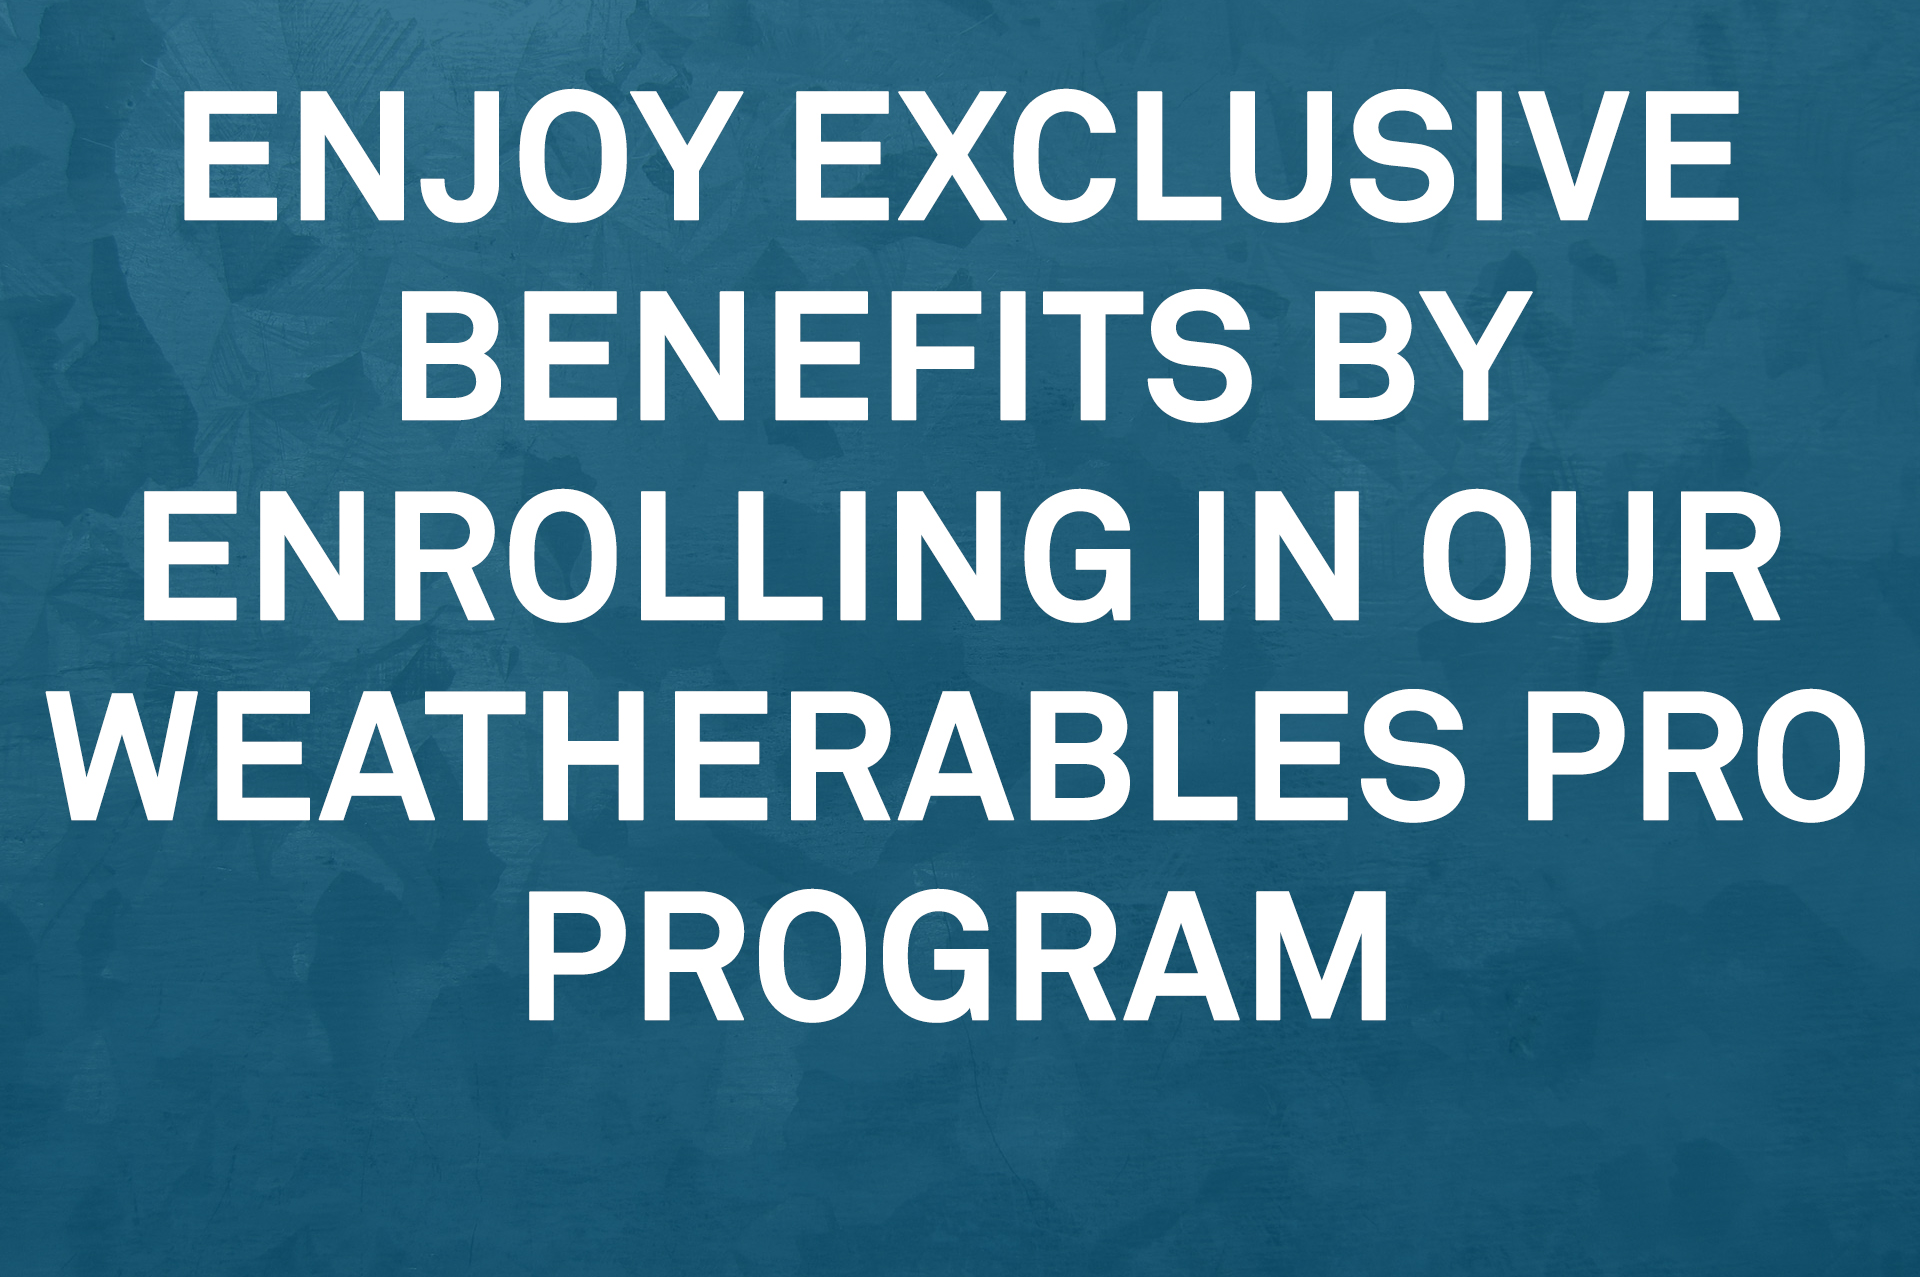 Enjoy exclusive benefits by enrolling in our weatherables pro program